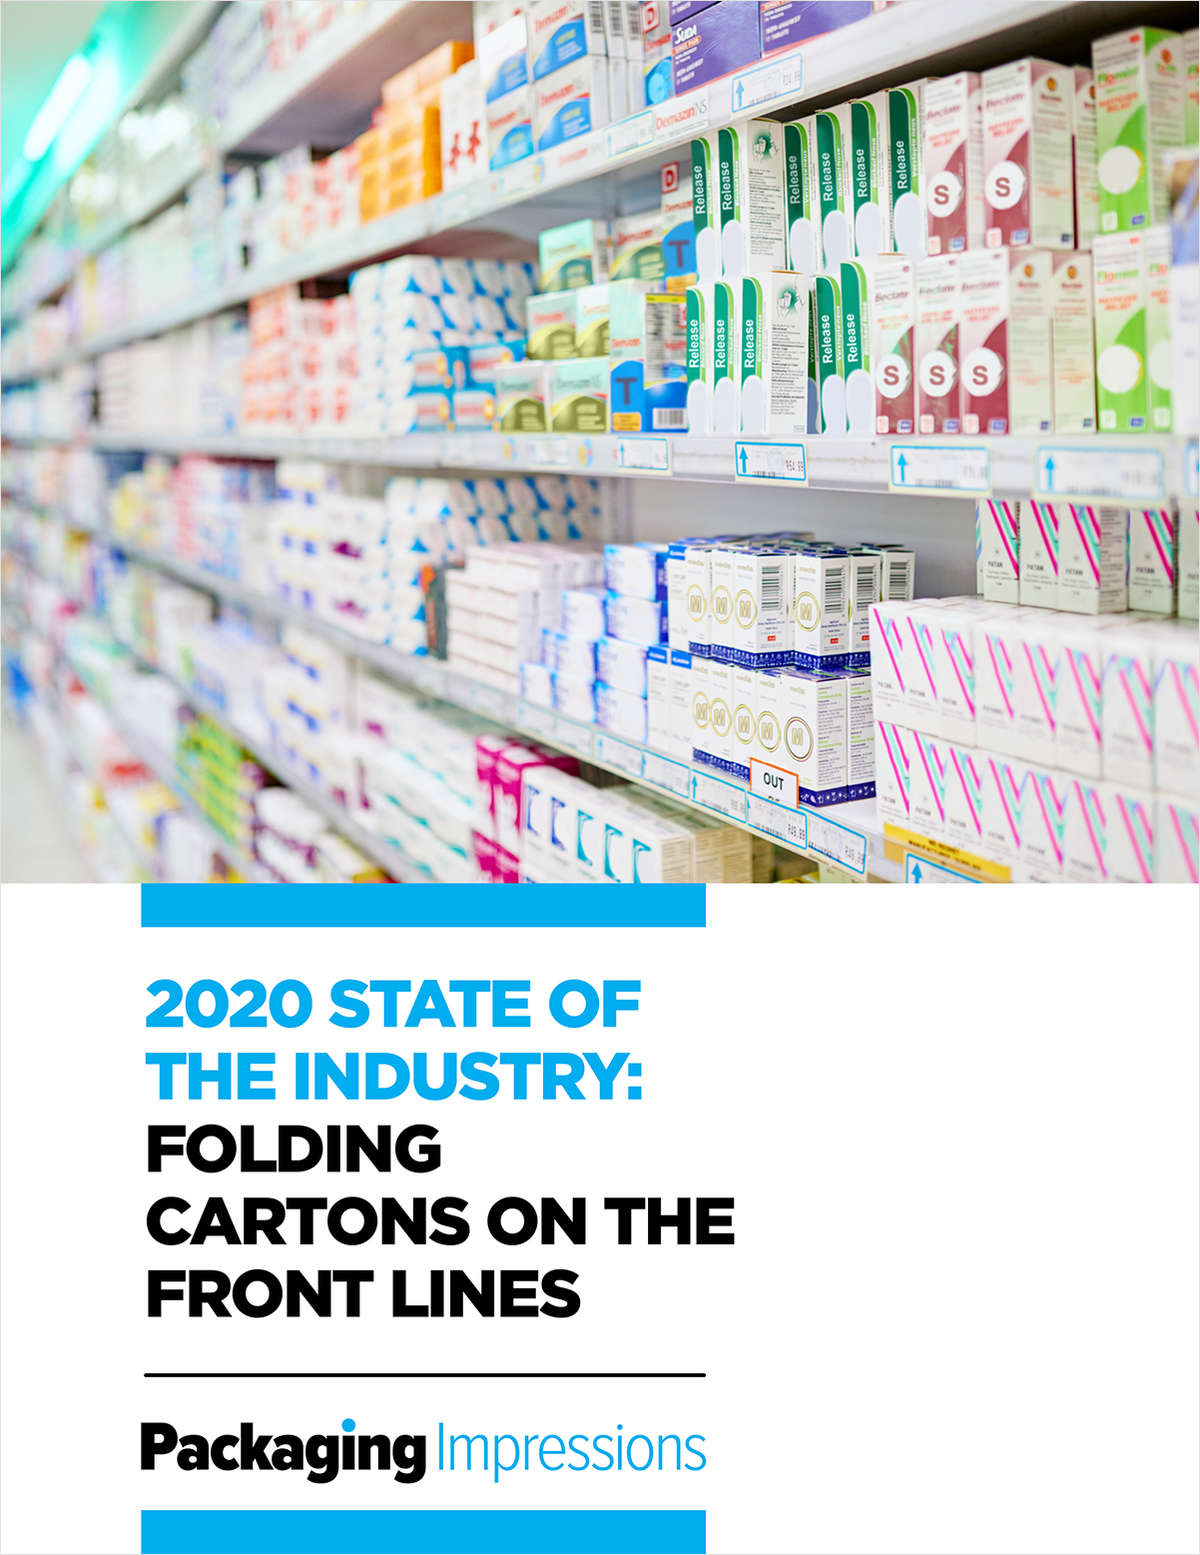 2020 State of the Industry: Folding Cartons on the Front Lines